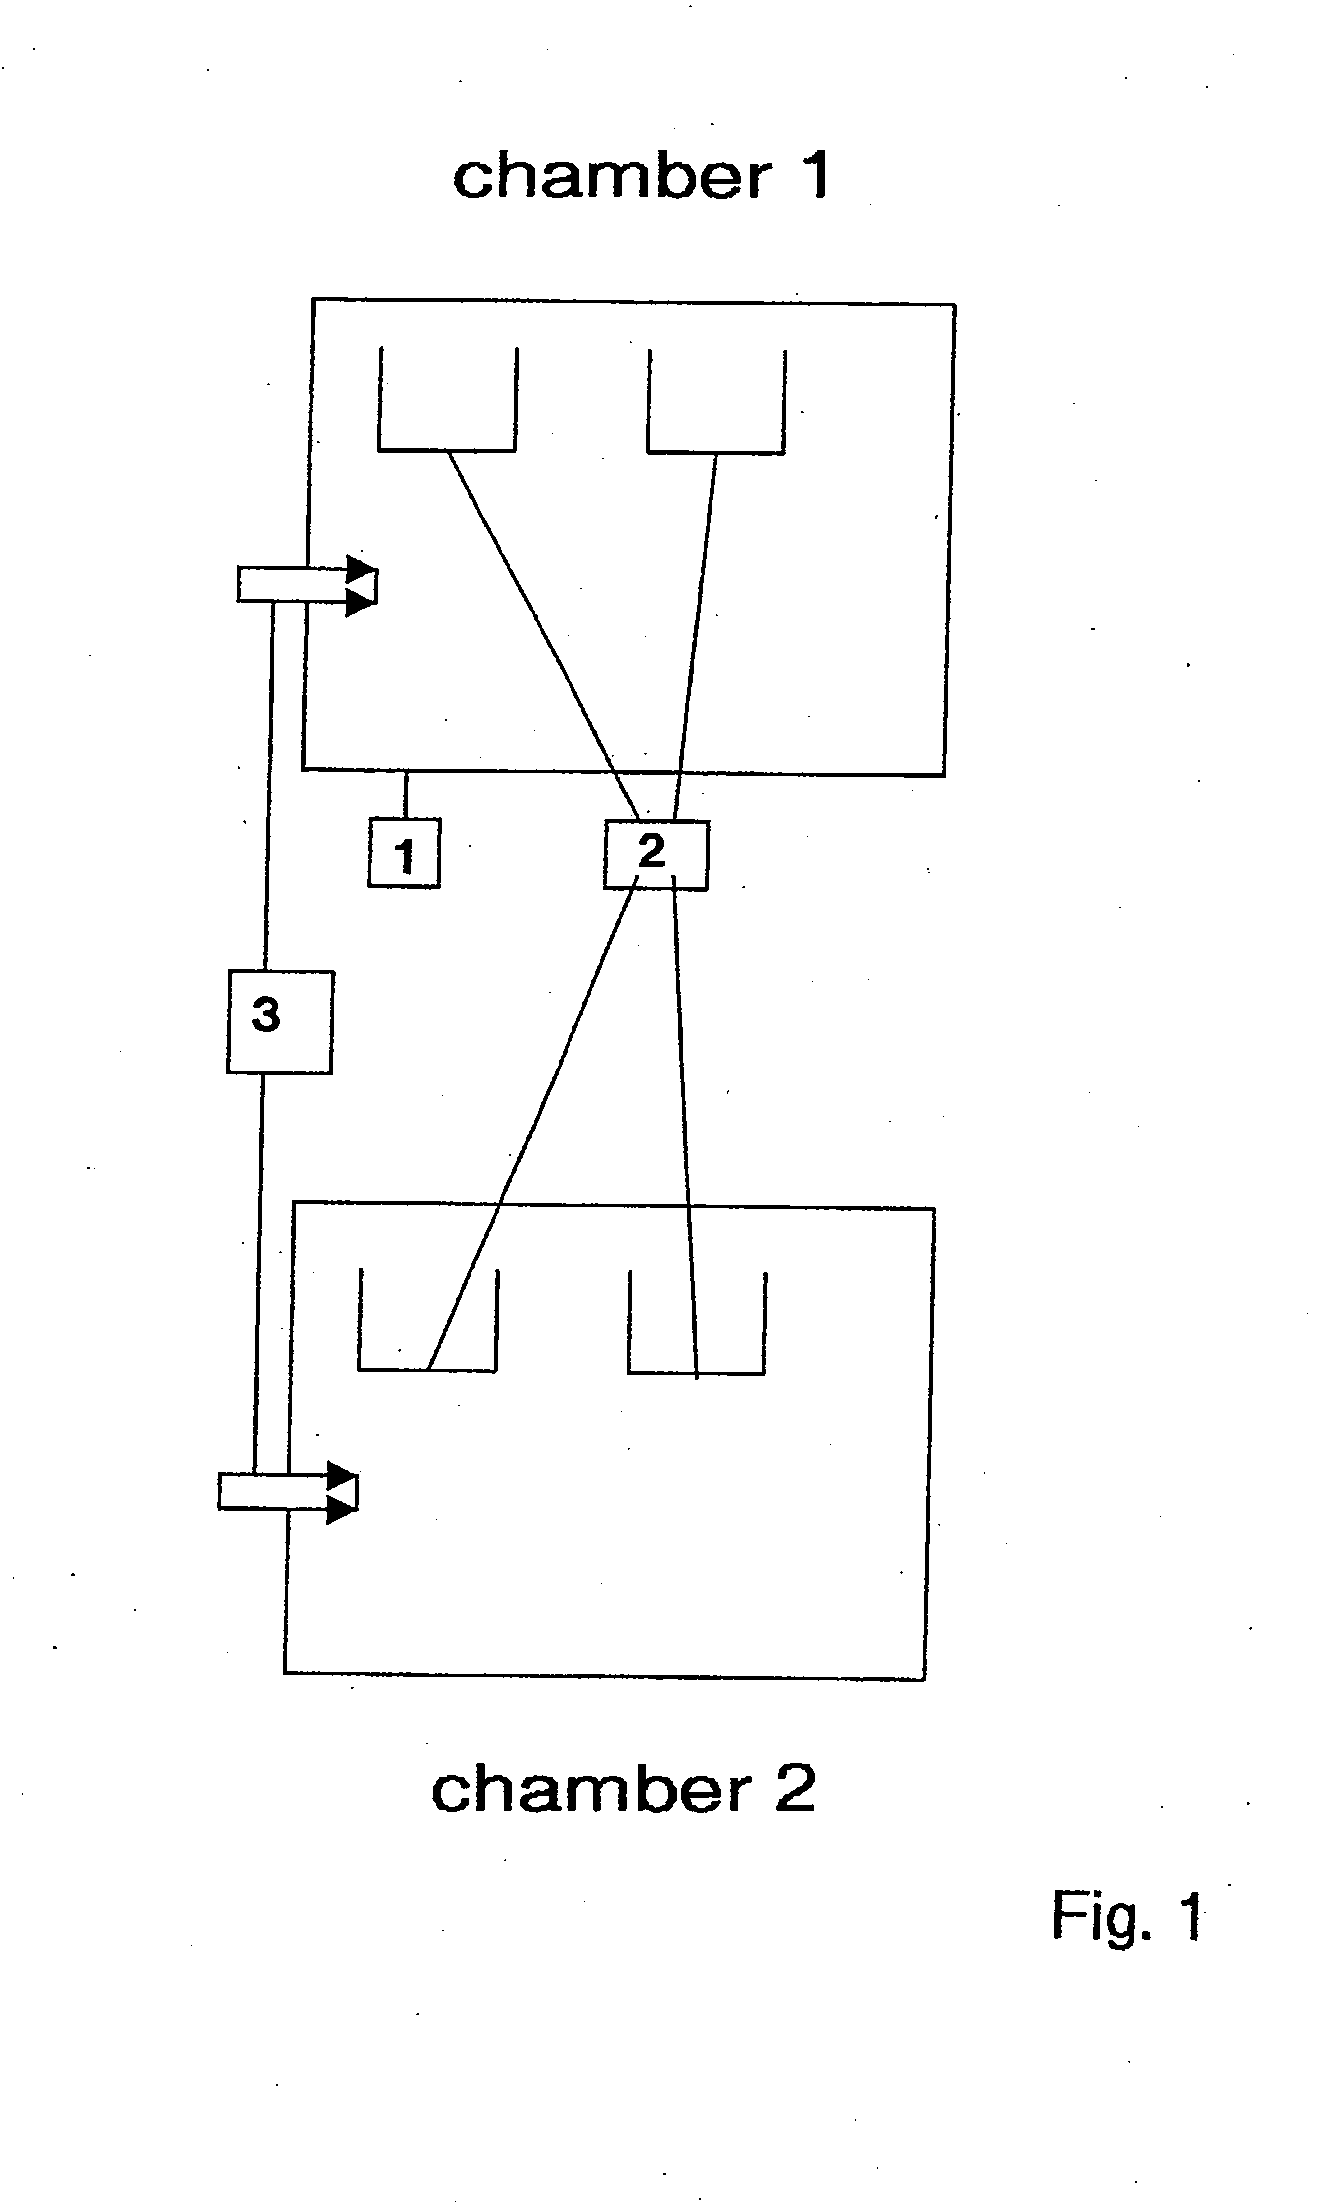 Method and device for burning-off precious metal-containing materials